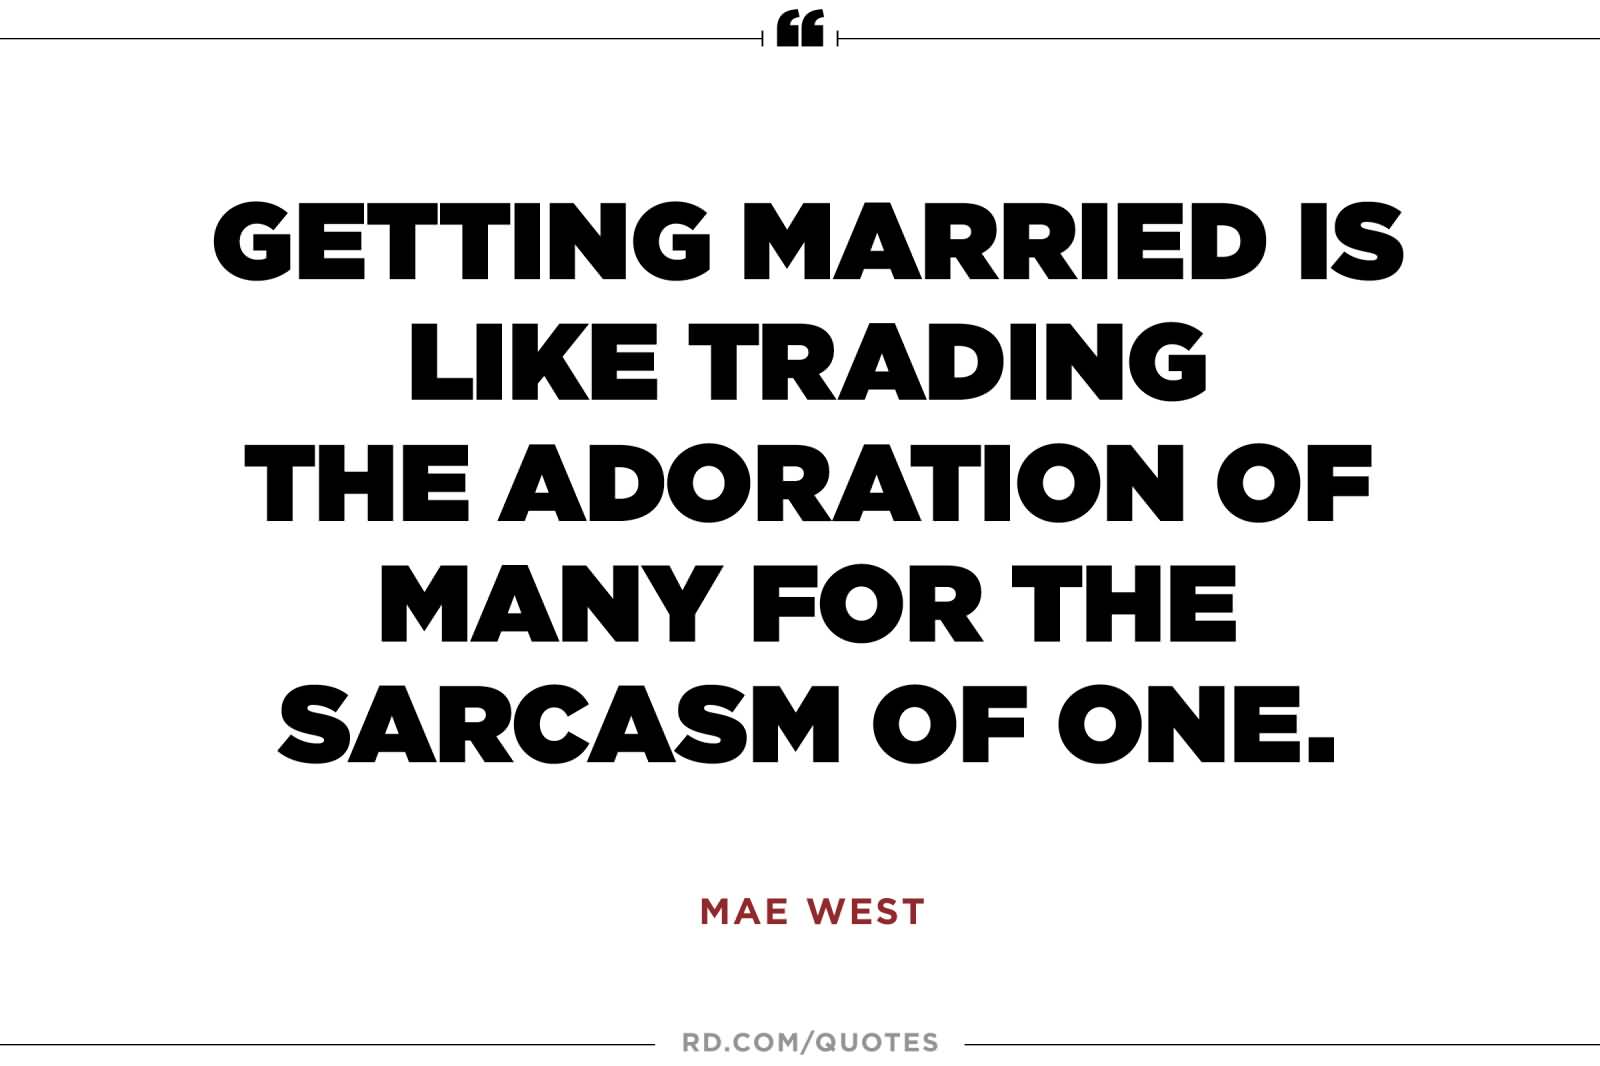 Getting married is like trading the adoration of many for the sarcasm of one. - Mae West